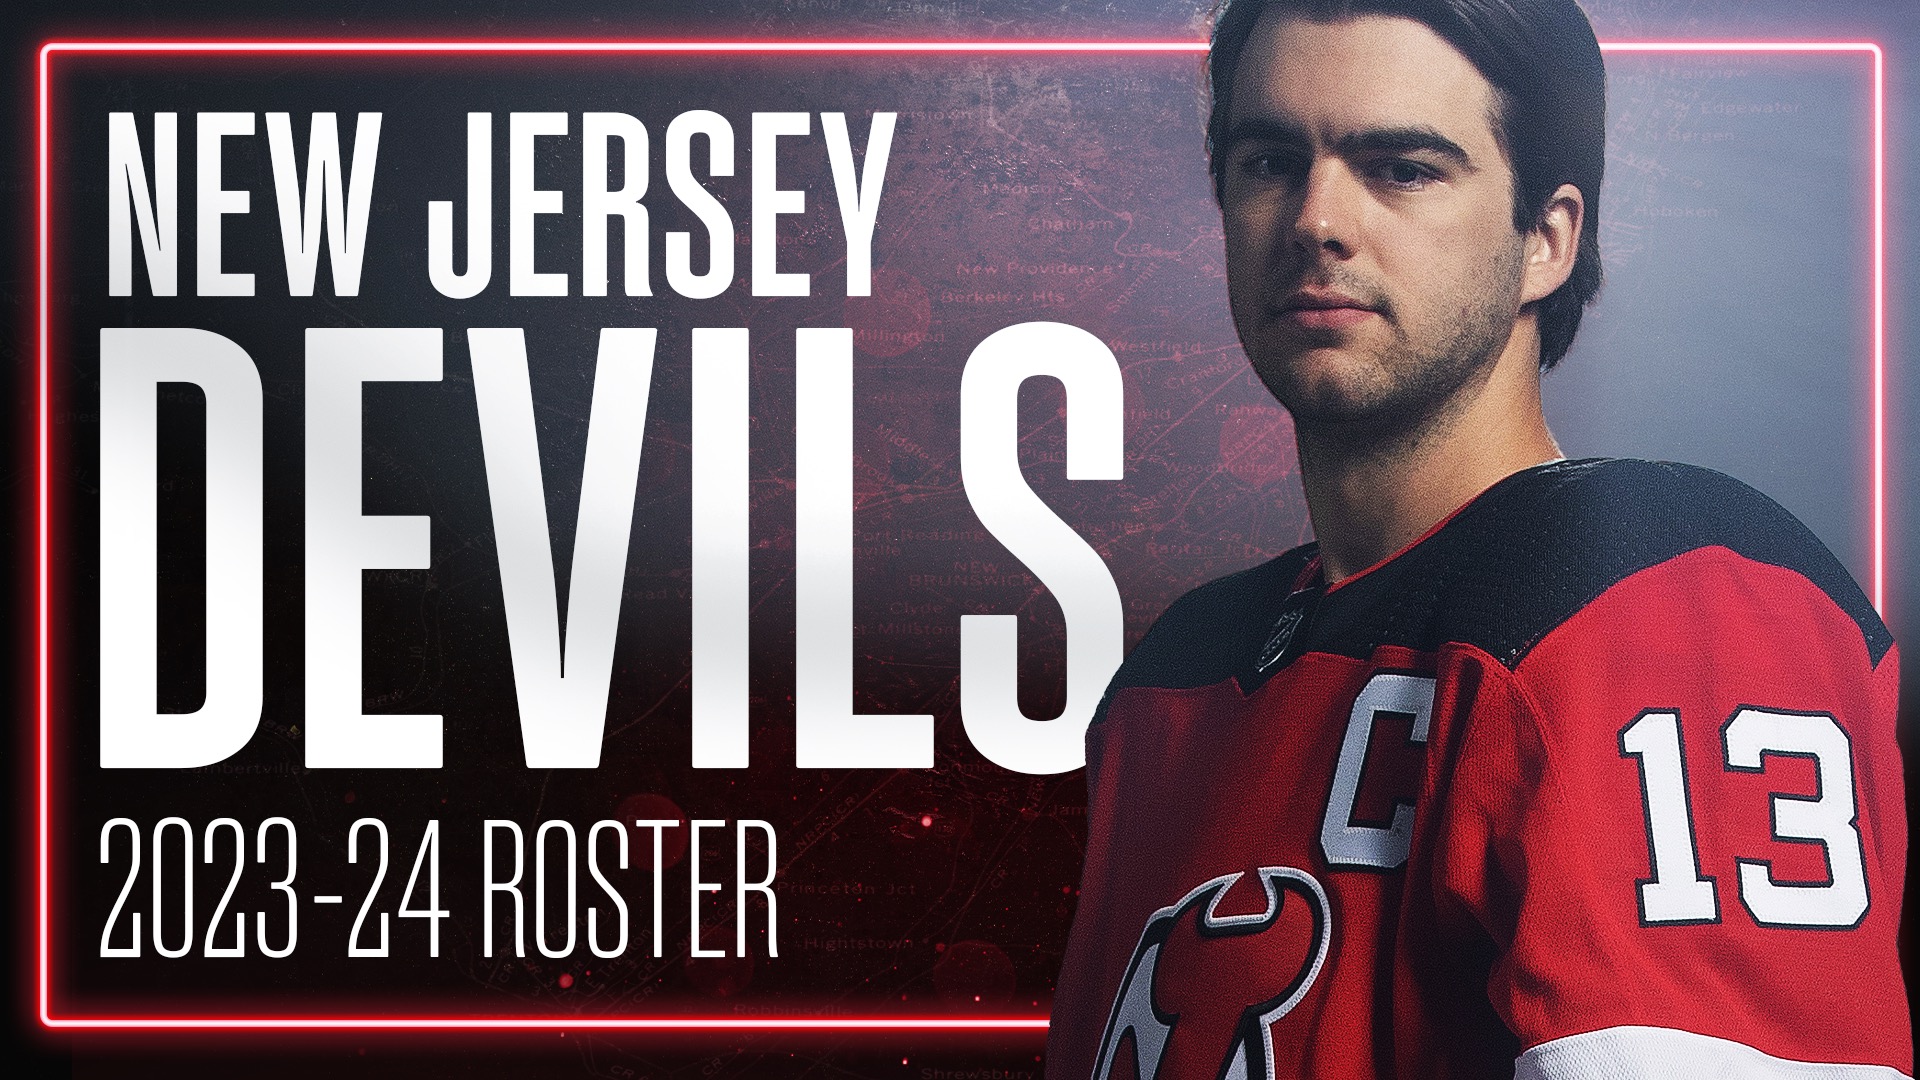 Bryce Salvador - TV Anaylst for the New Jersey Devils - MSG Networks Inc.